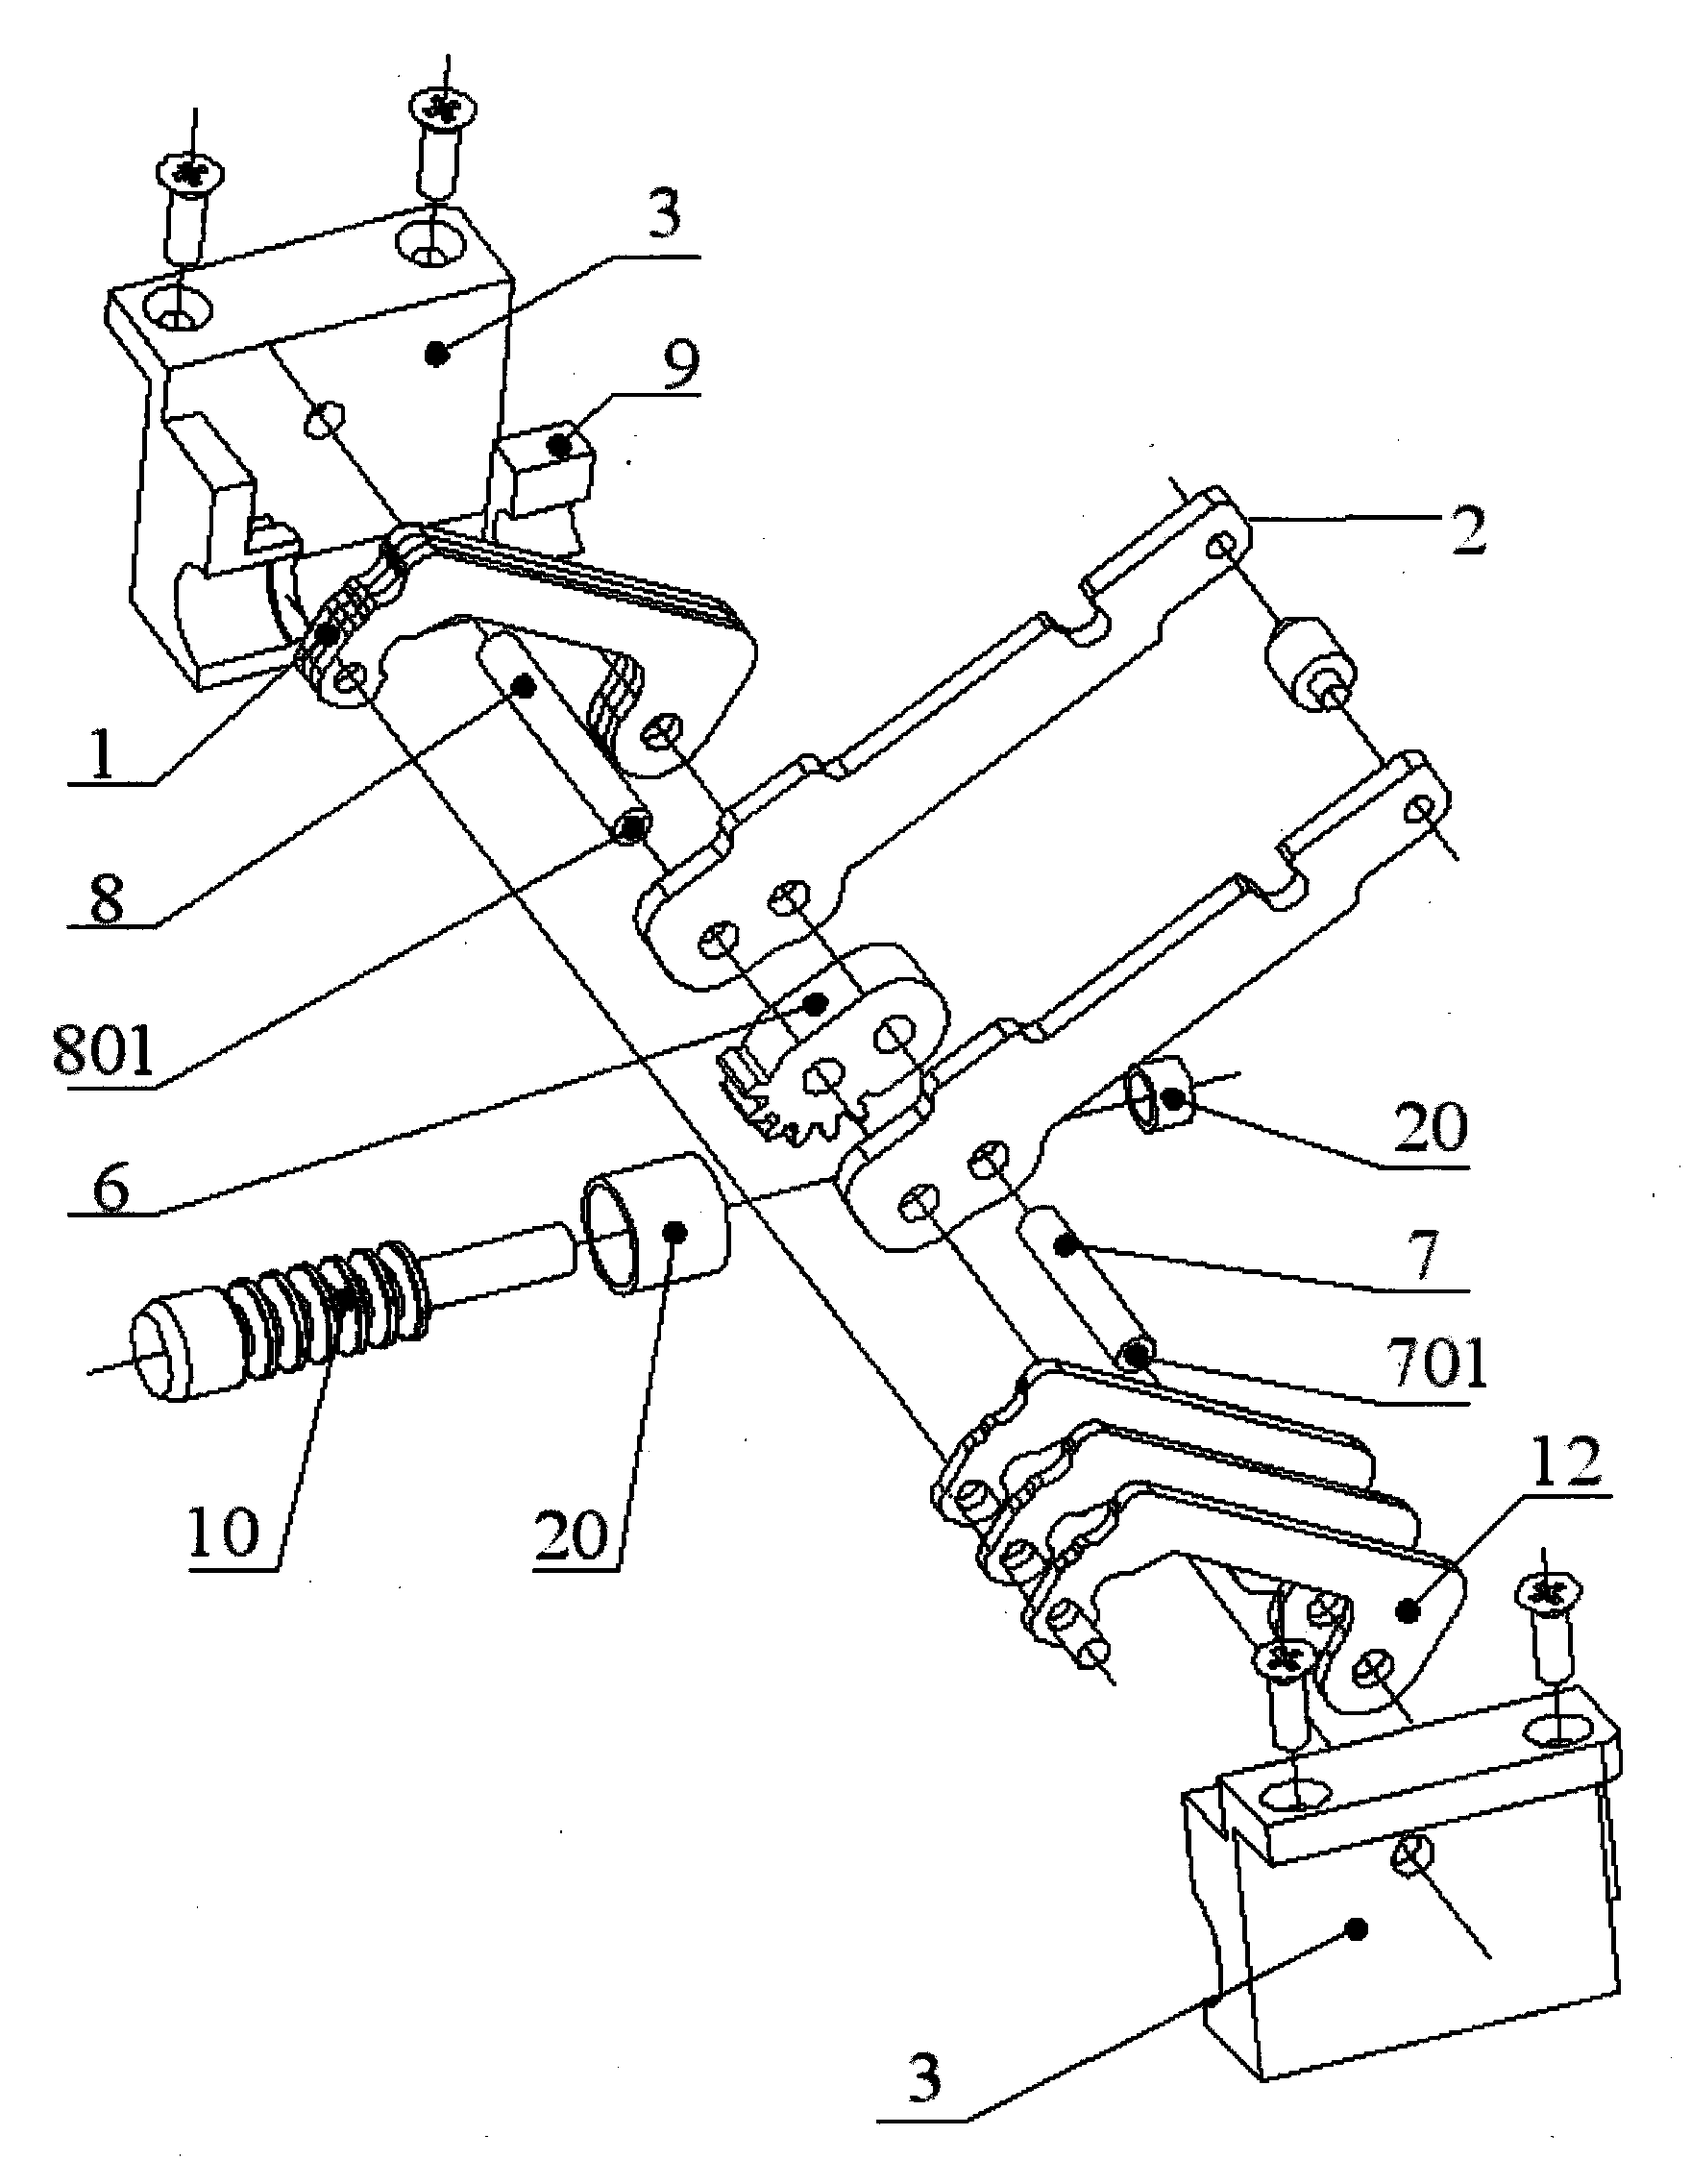 Locking connecting device, LED (Light Emitting Diode) screen box and LED display screen